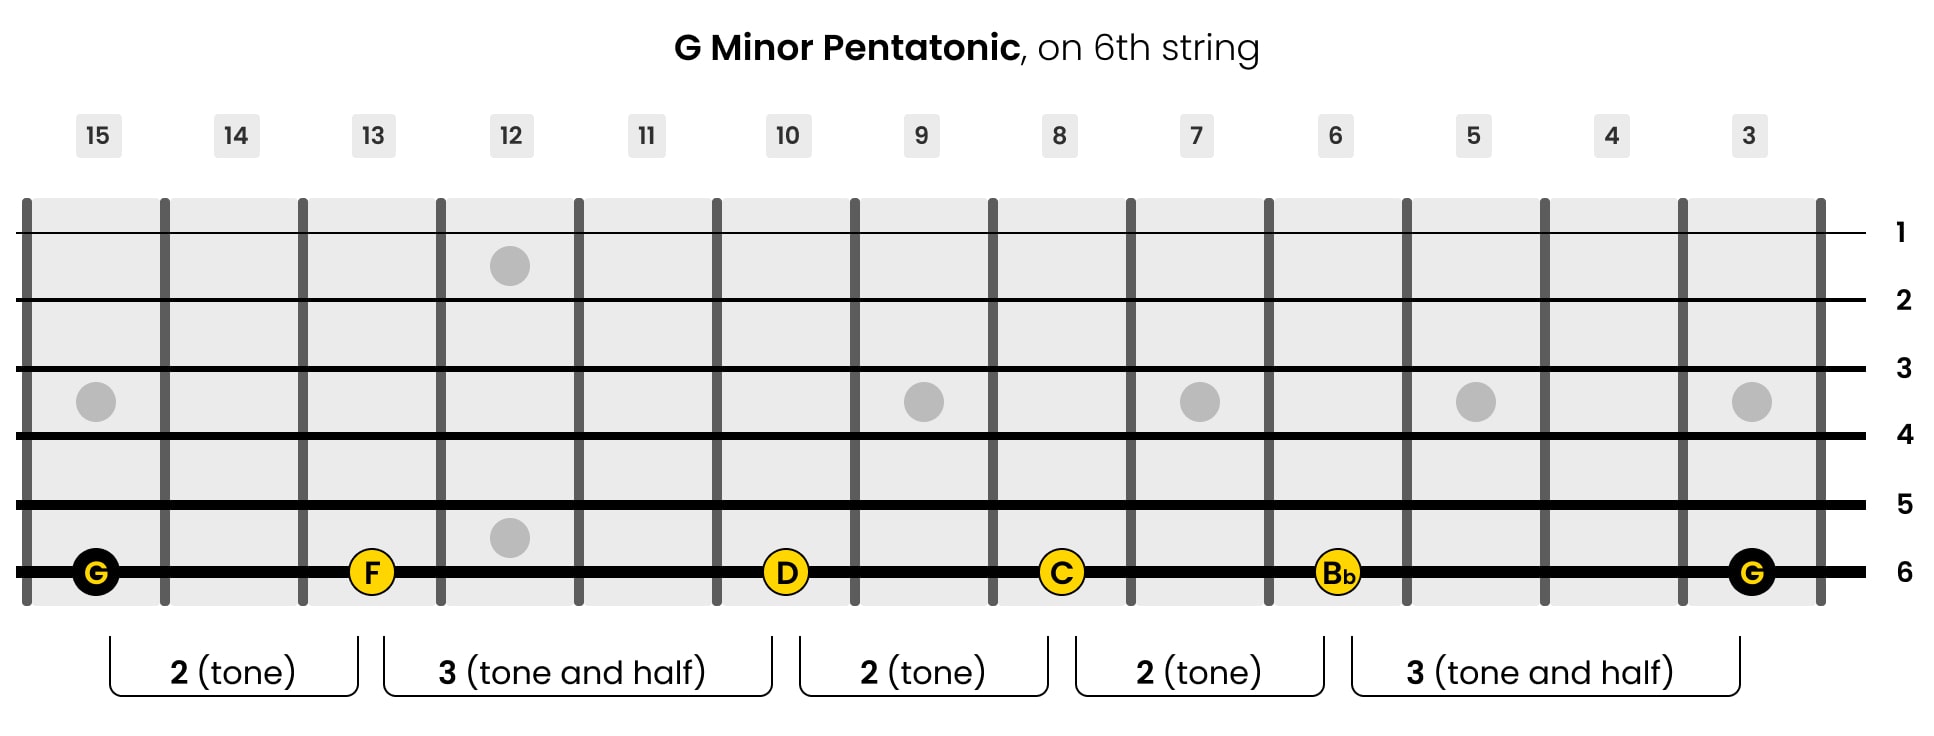 Left-Handed G Minor Pentatonic Guitar Scale on 6th String